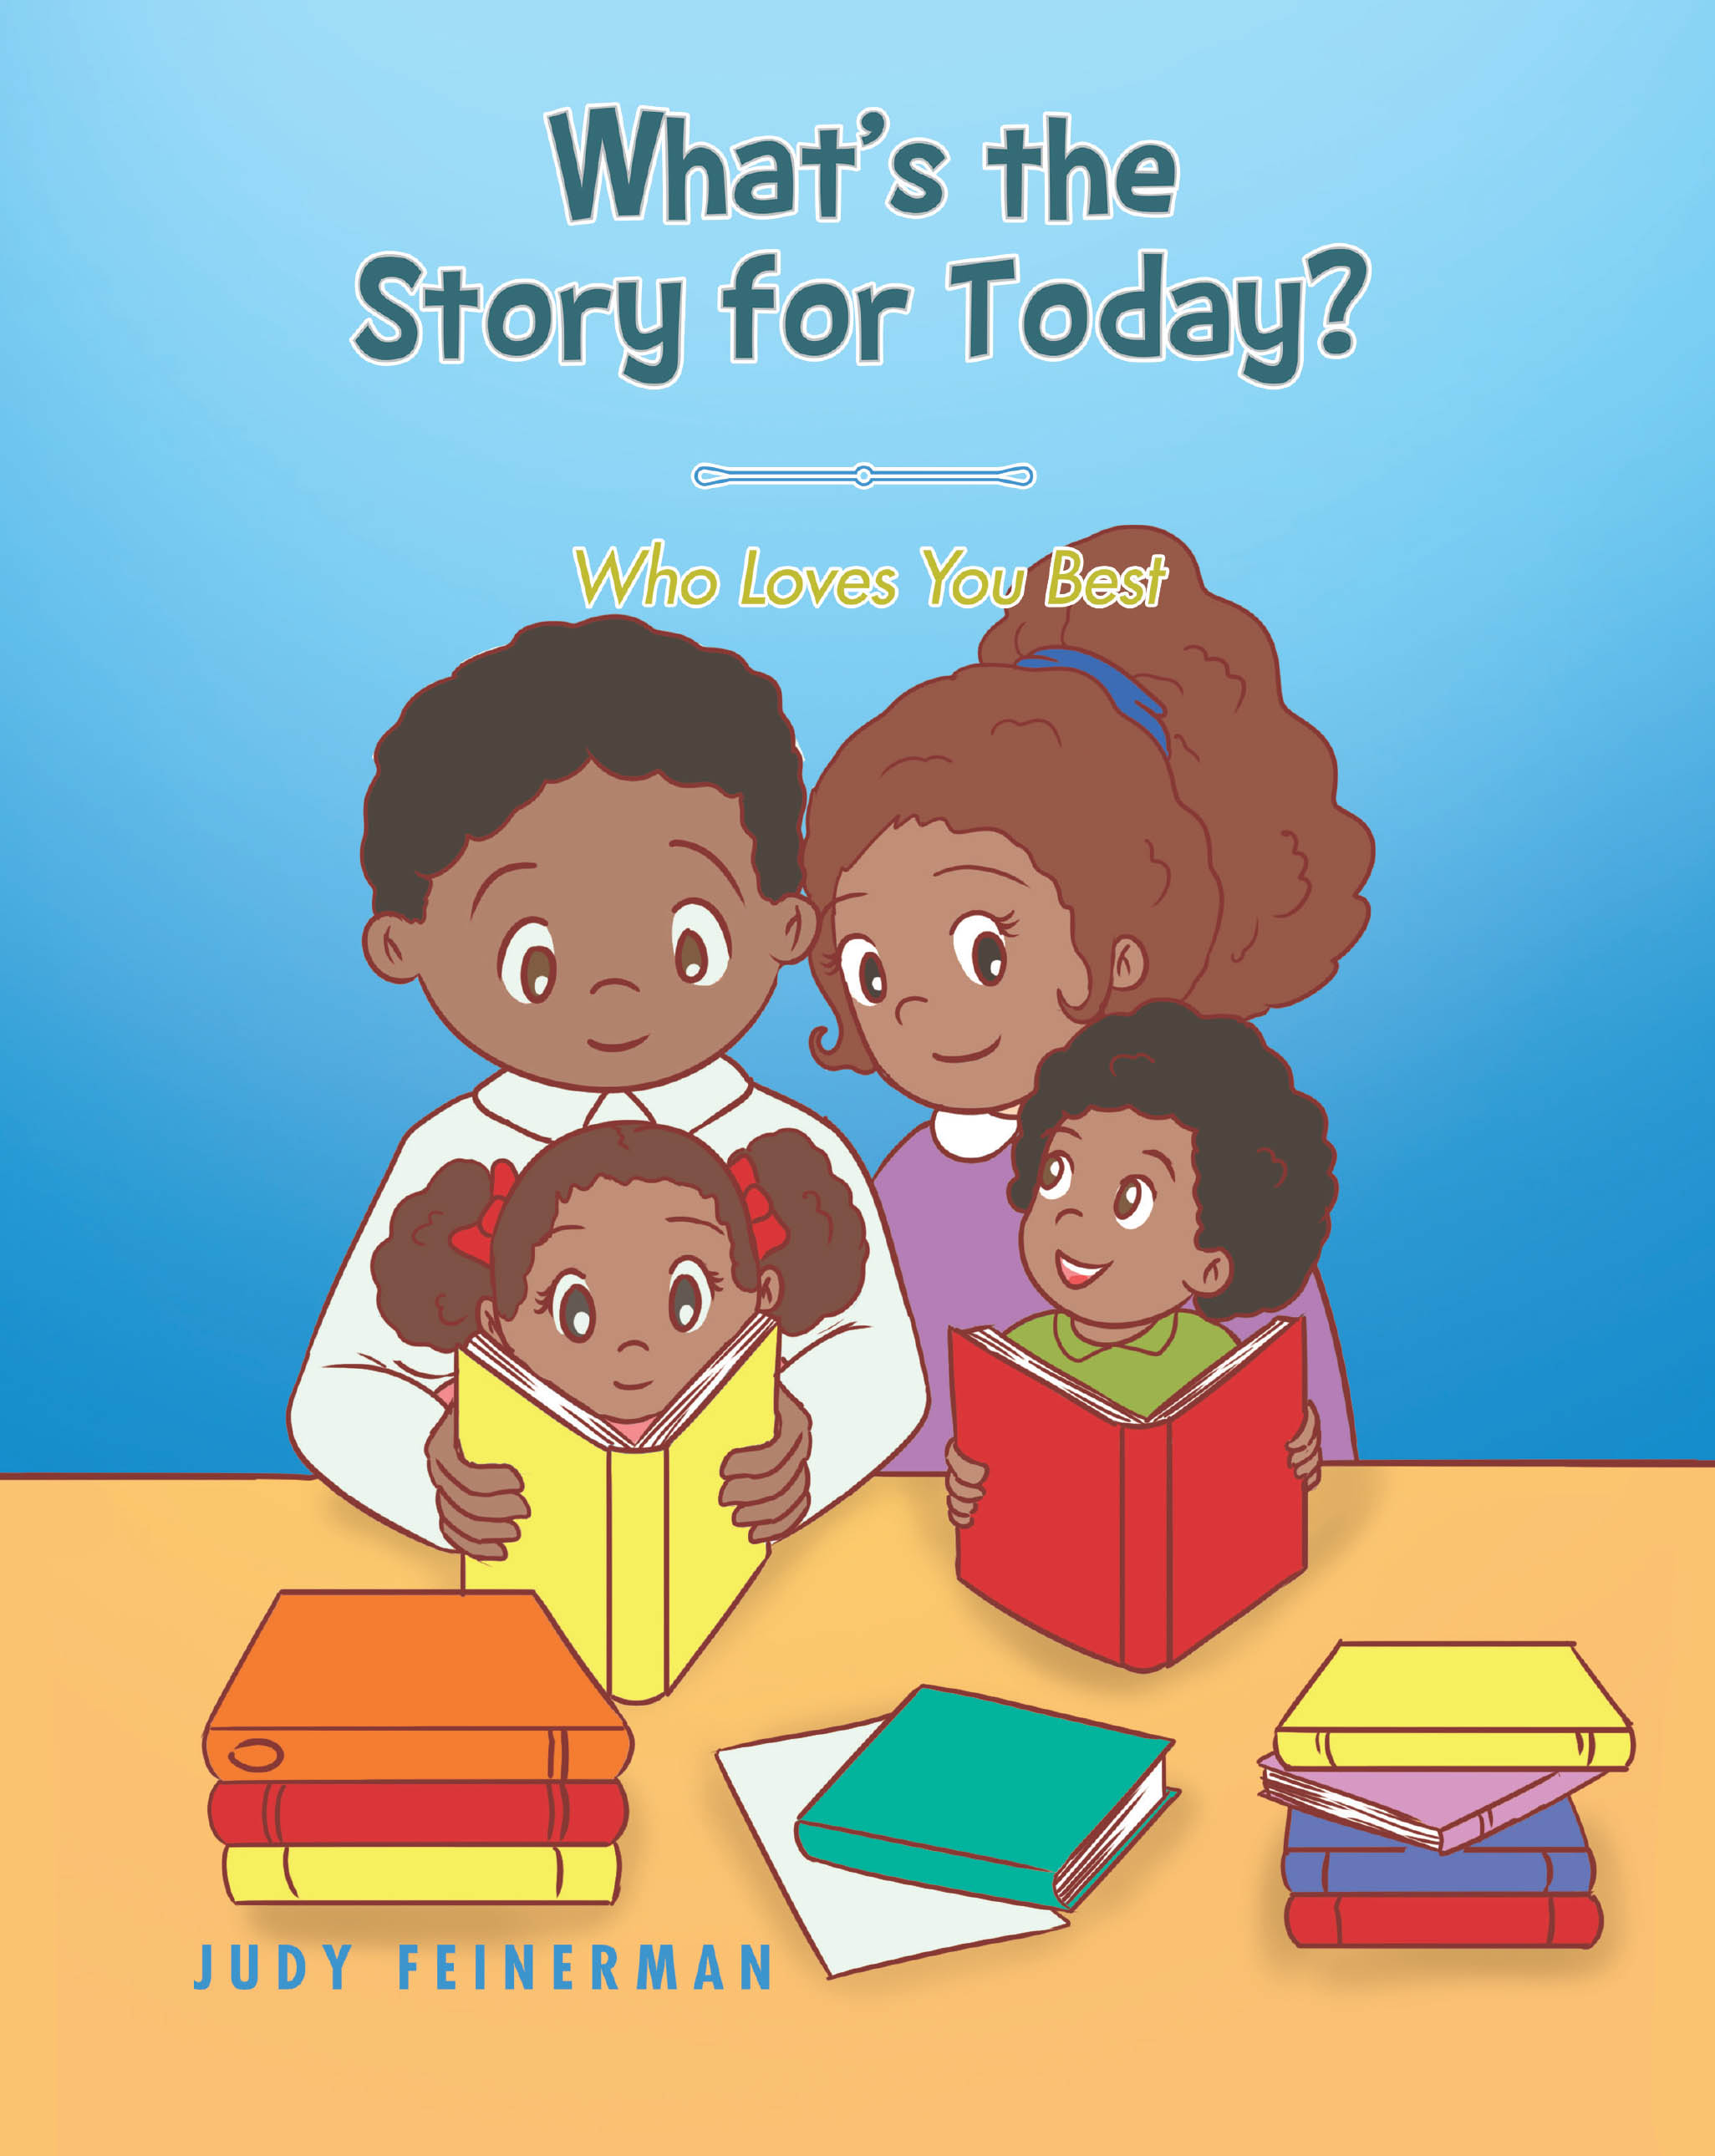 Judy Feinerman’s New Book, "What's the Story for Today? Who Loves You Best," Contains Interactive Summaries of the World's Most Memorable Children's Tales